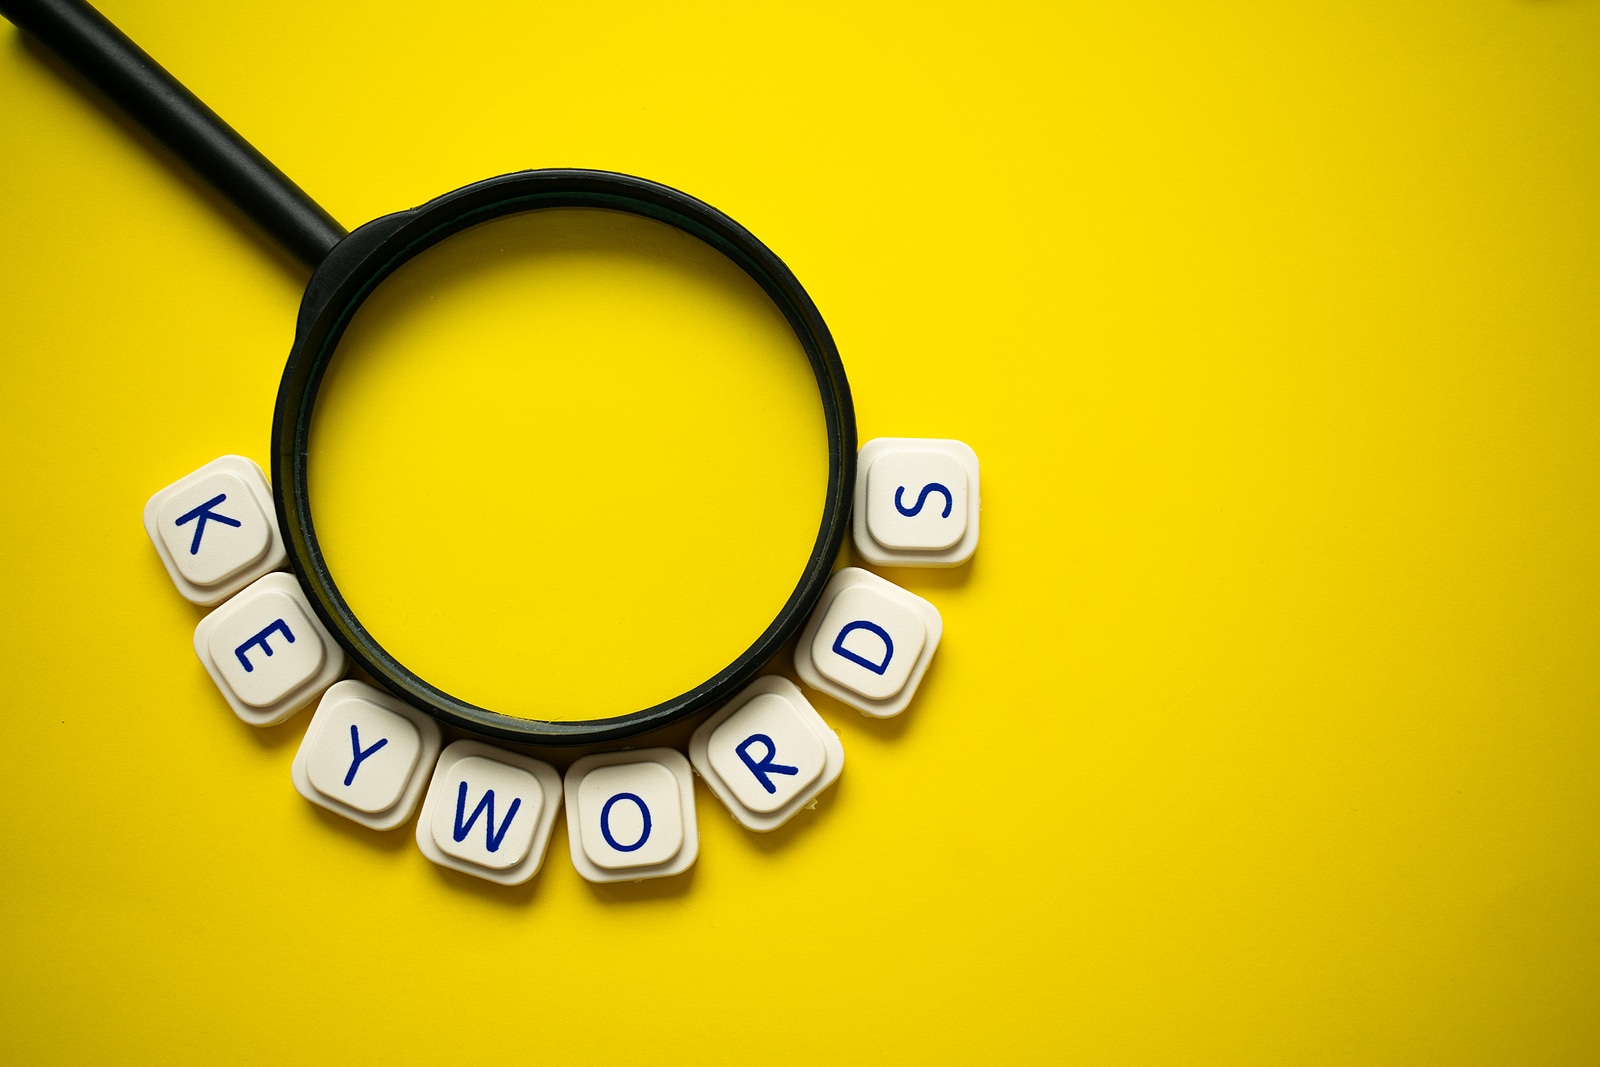 magnifying glass and letter tiles spelling "keywords" to represent the importance of business owners doing extensive keyword research when working on SEO